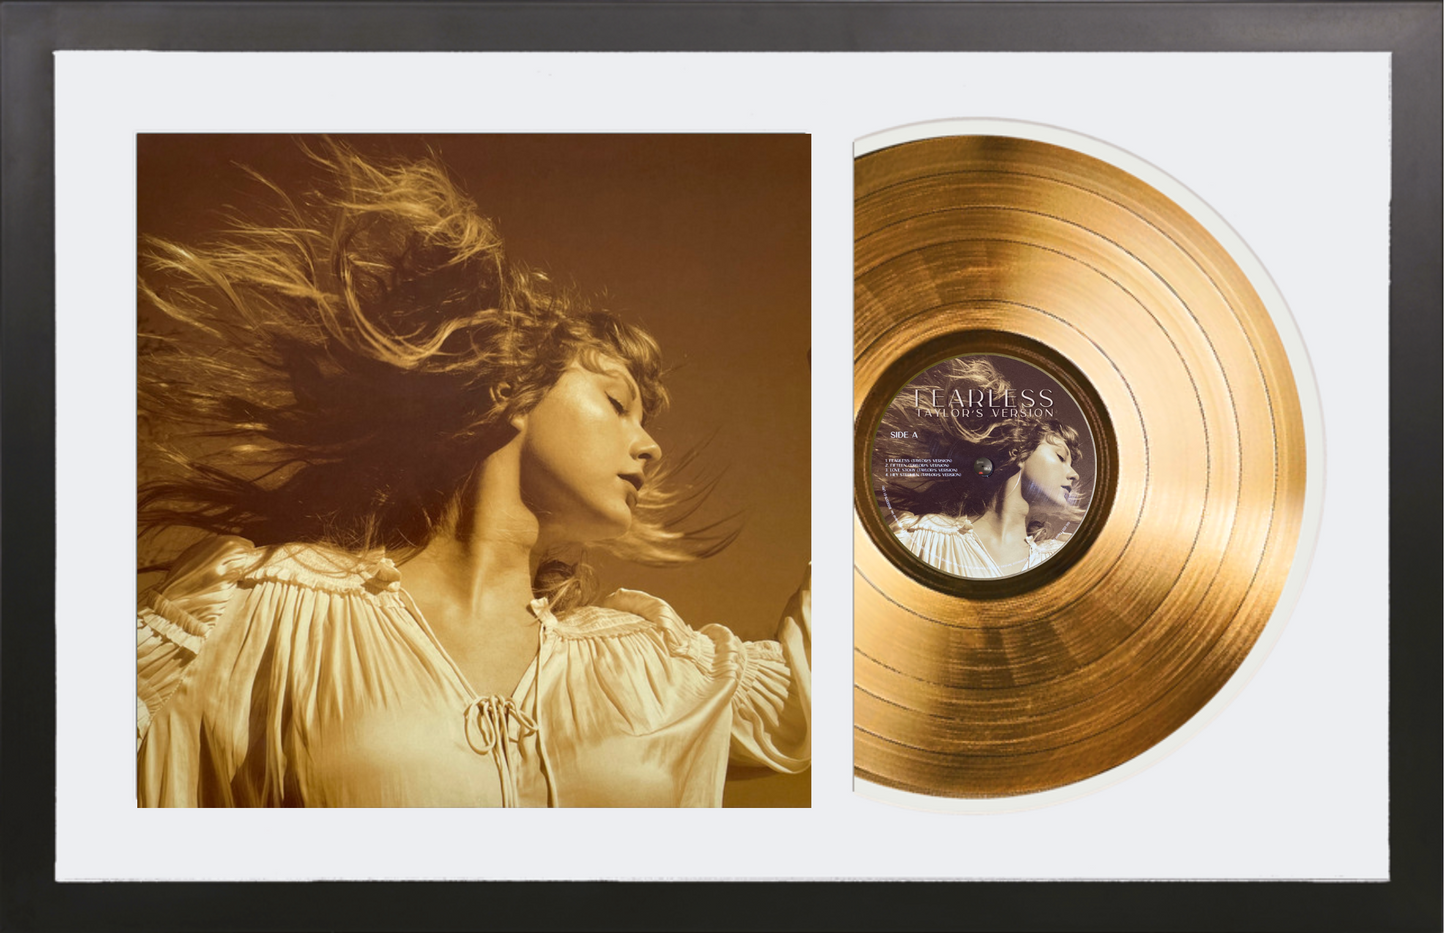 Taylor Swift - Fearless (Taylor's Version) - 14K Gold Record - Limited Edition Album